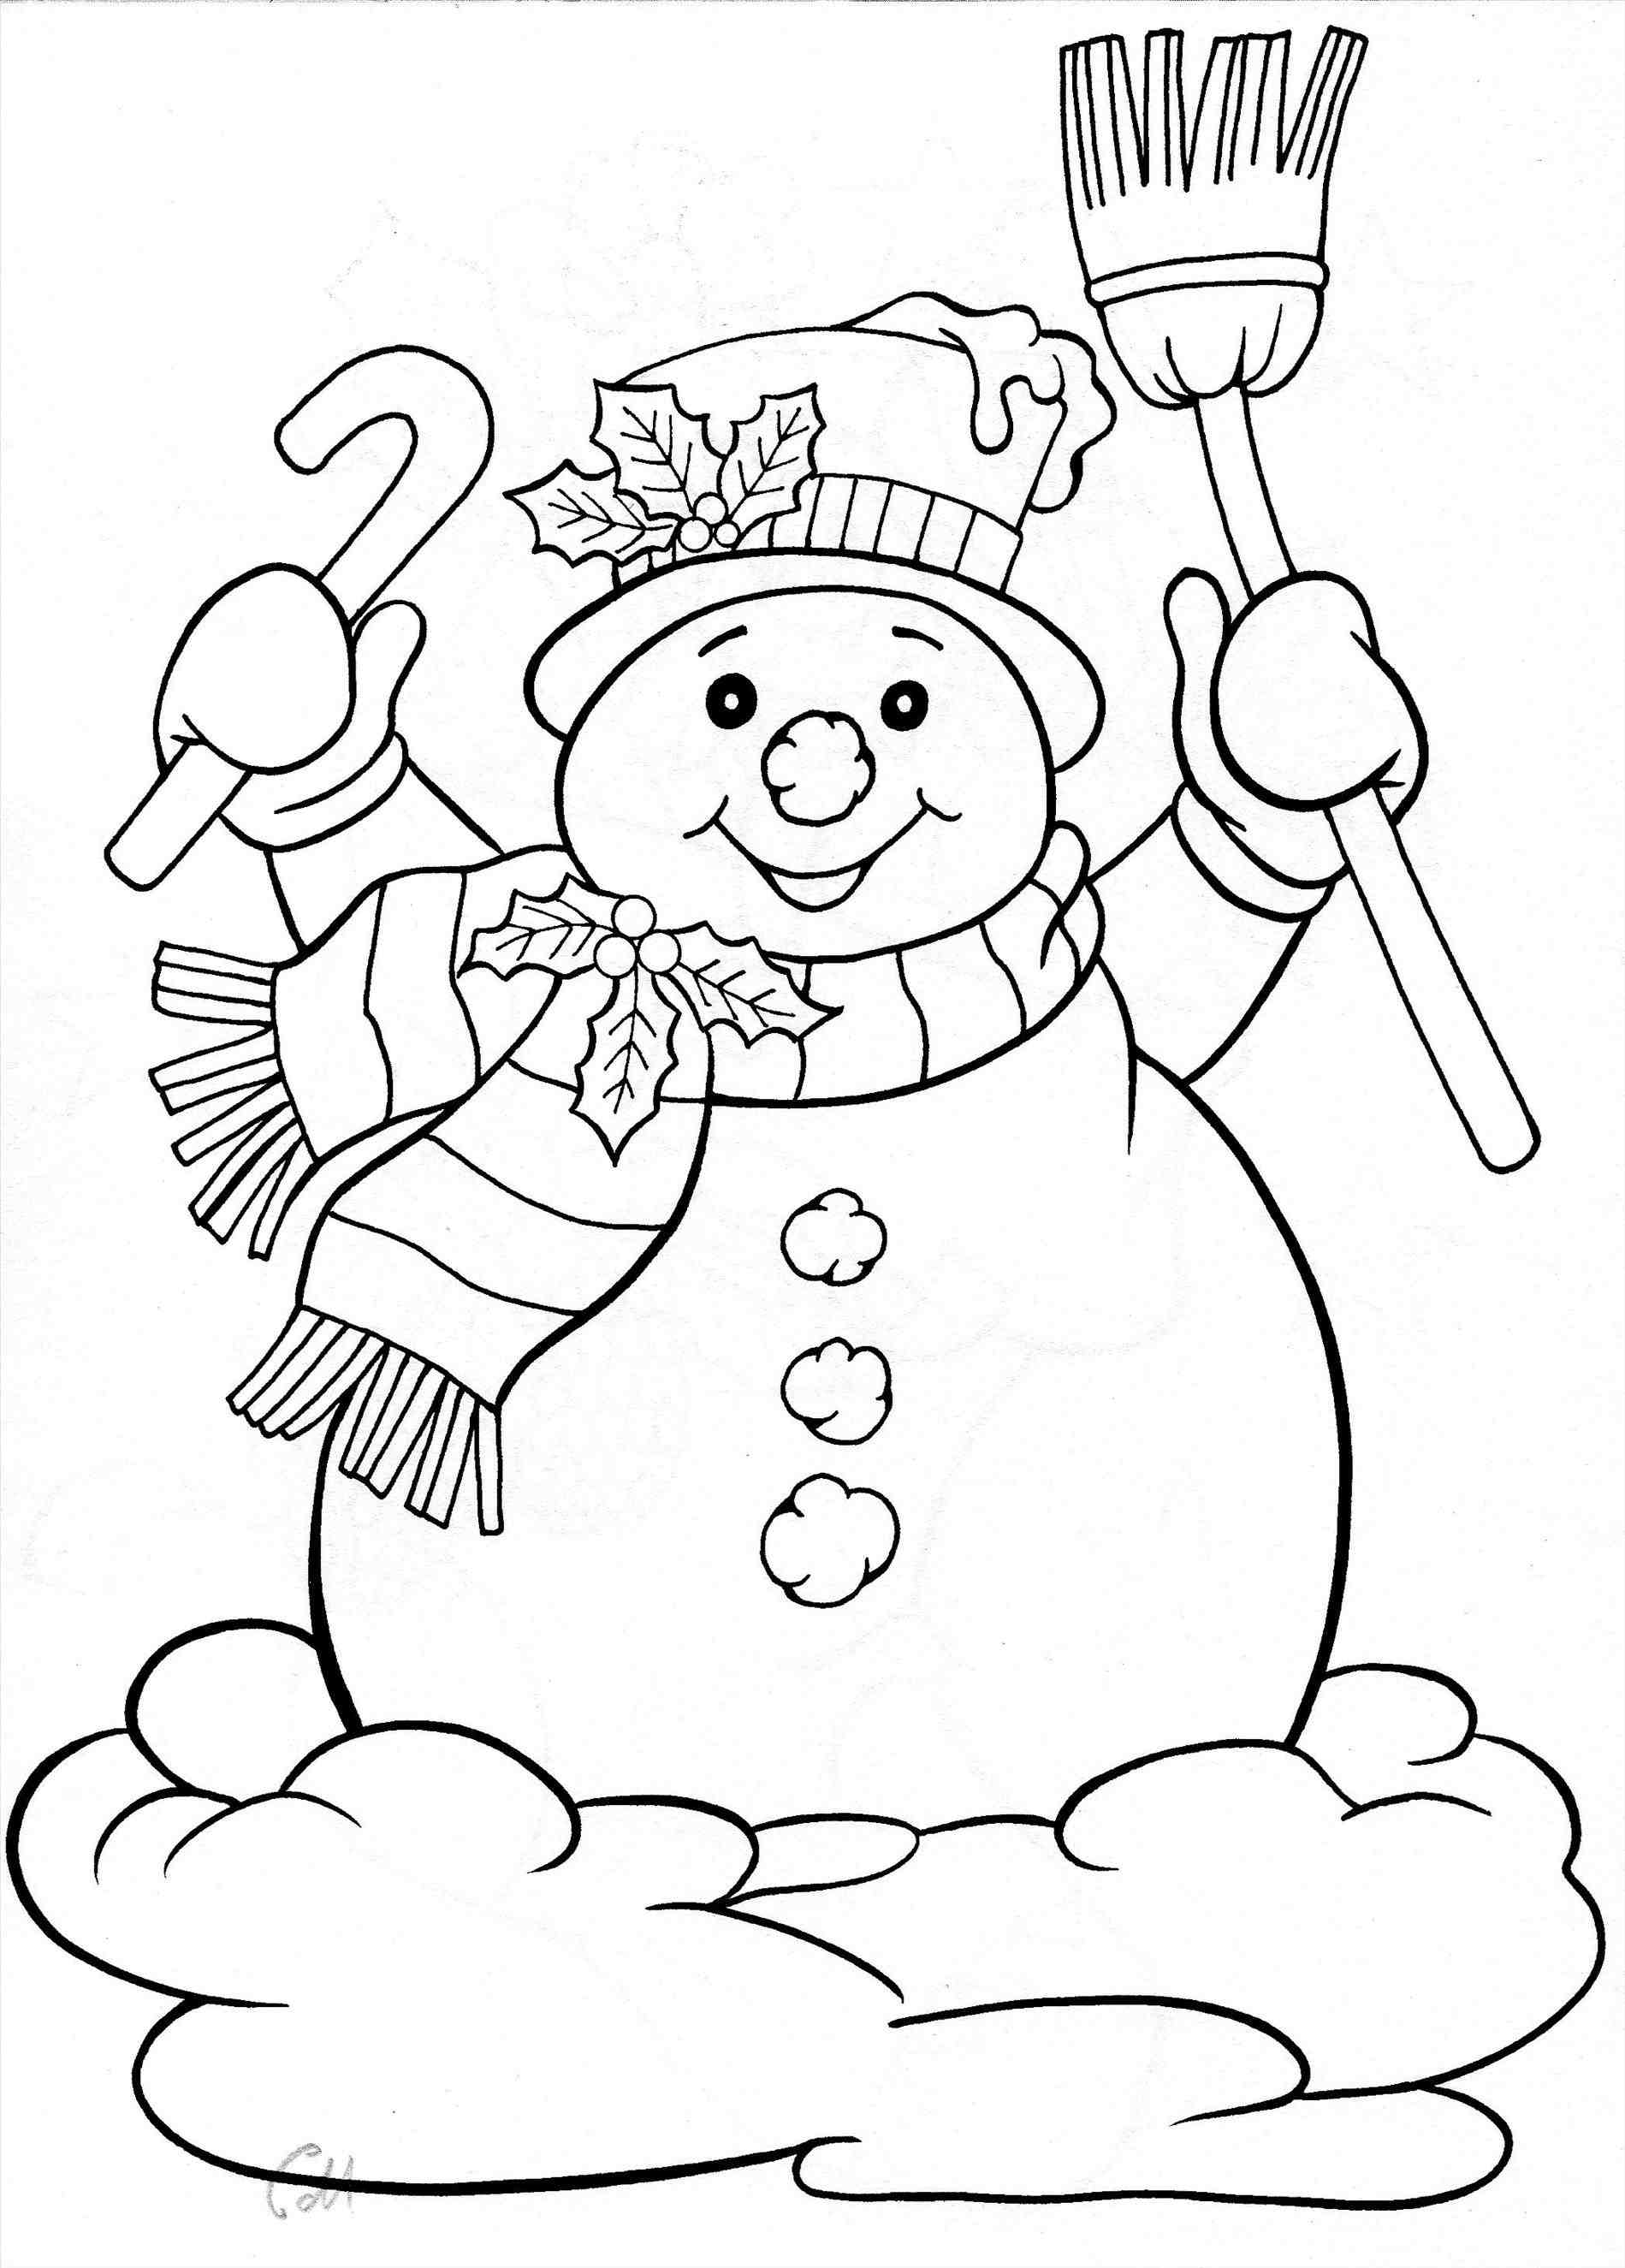 Cute Snowman Coloring Pages at Free printable